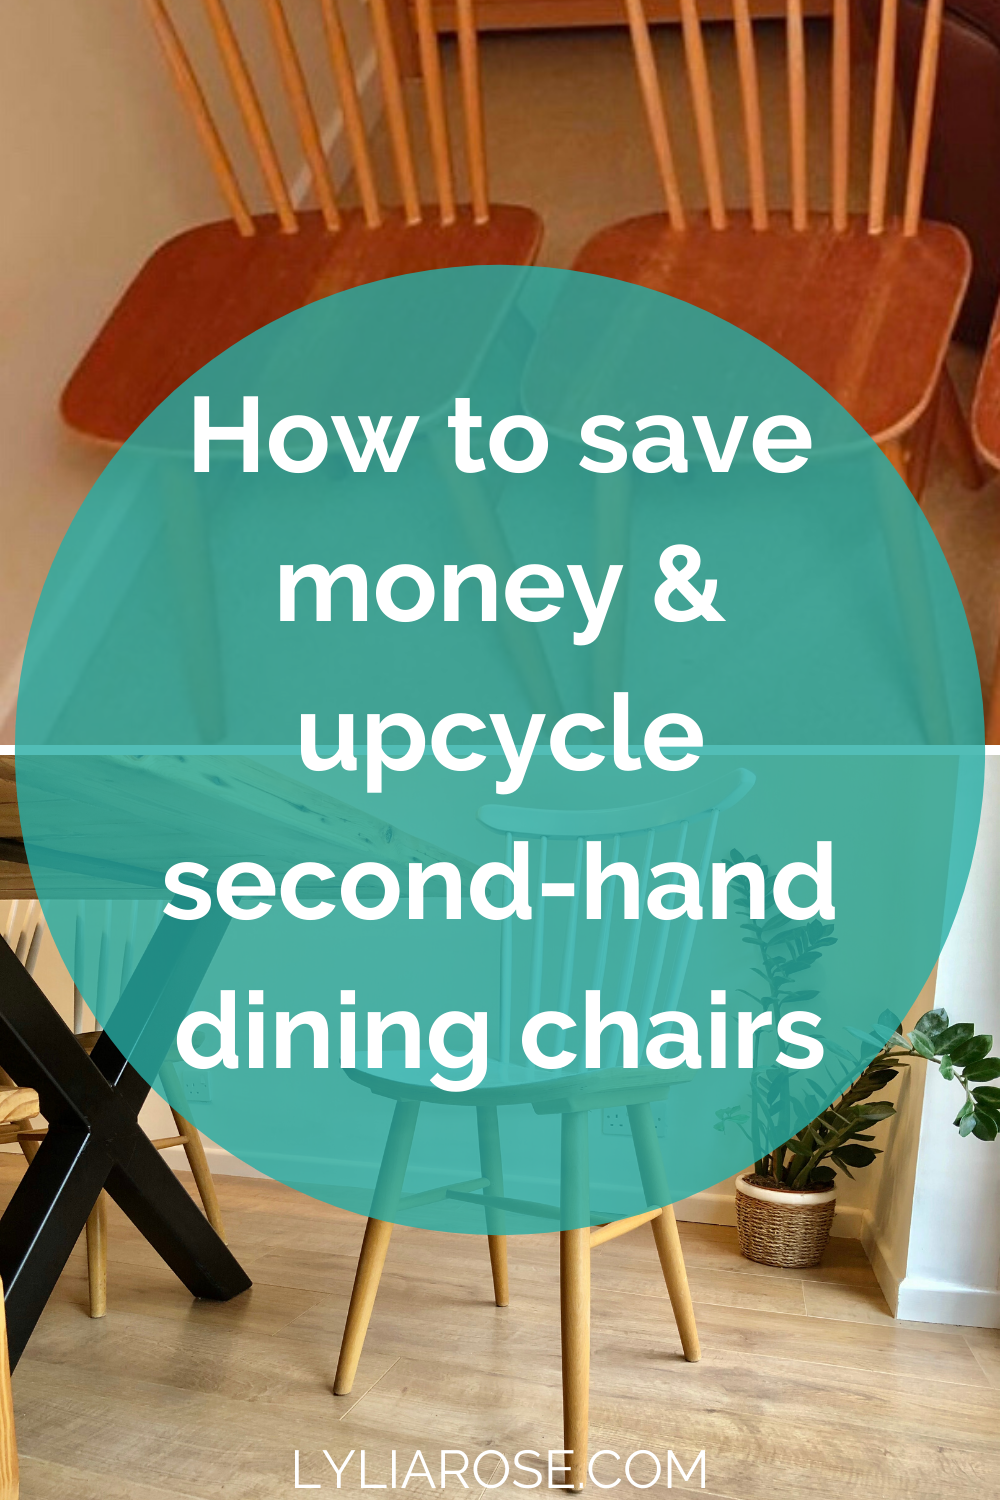 How to save money and upcycle second-hand dining chairs